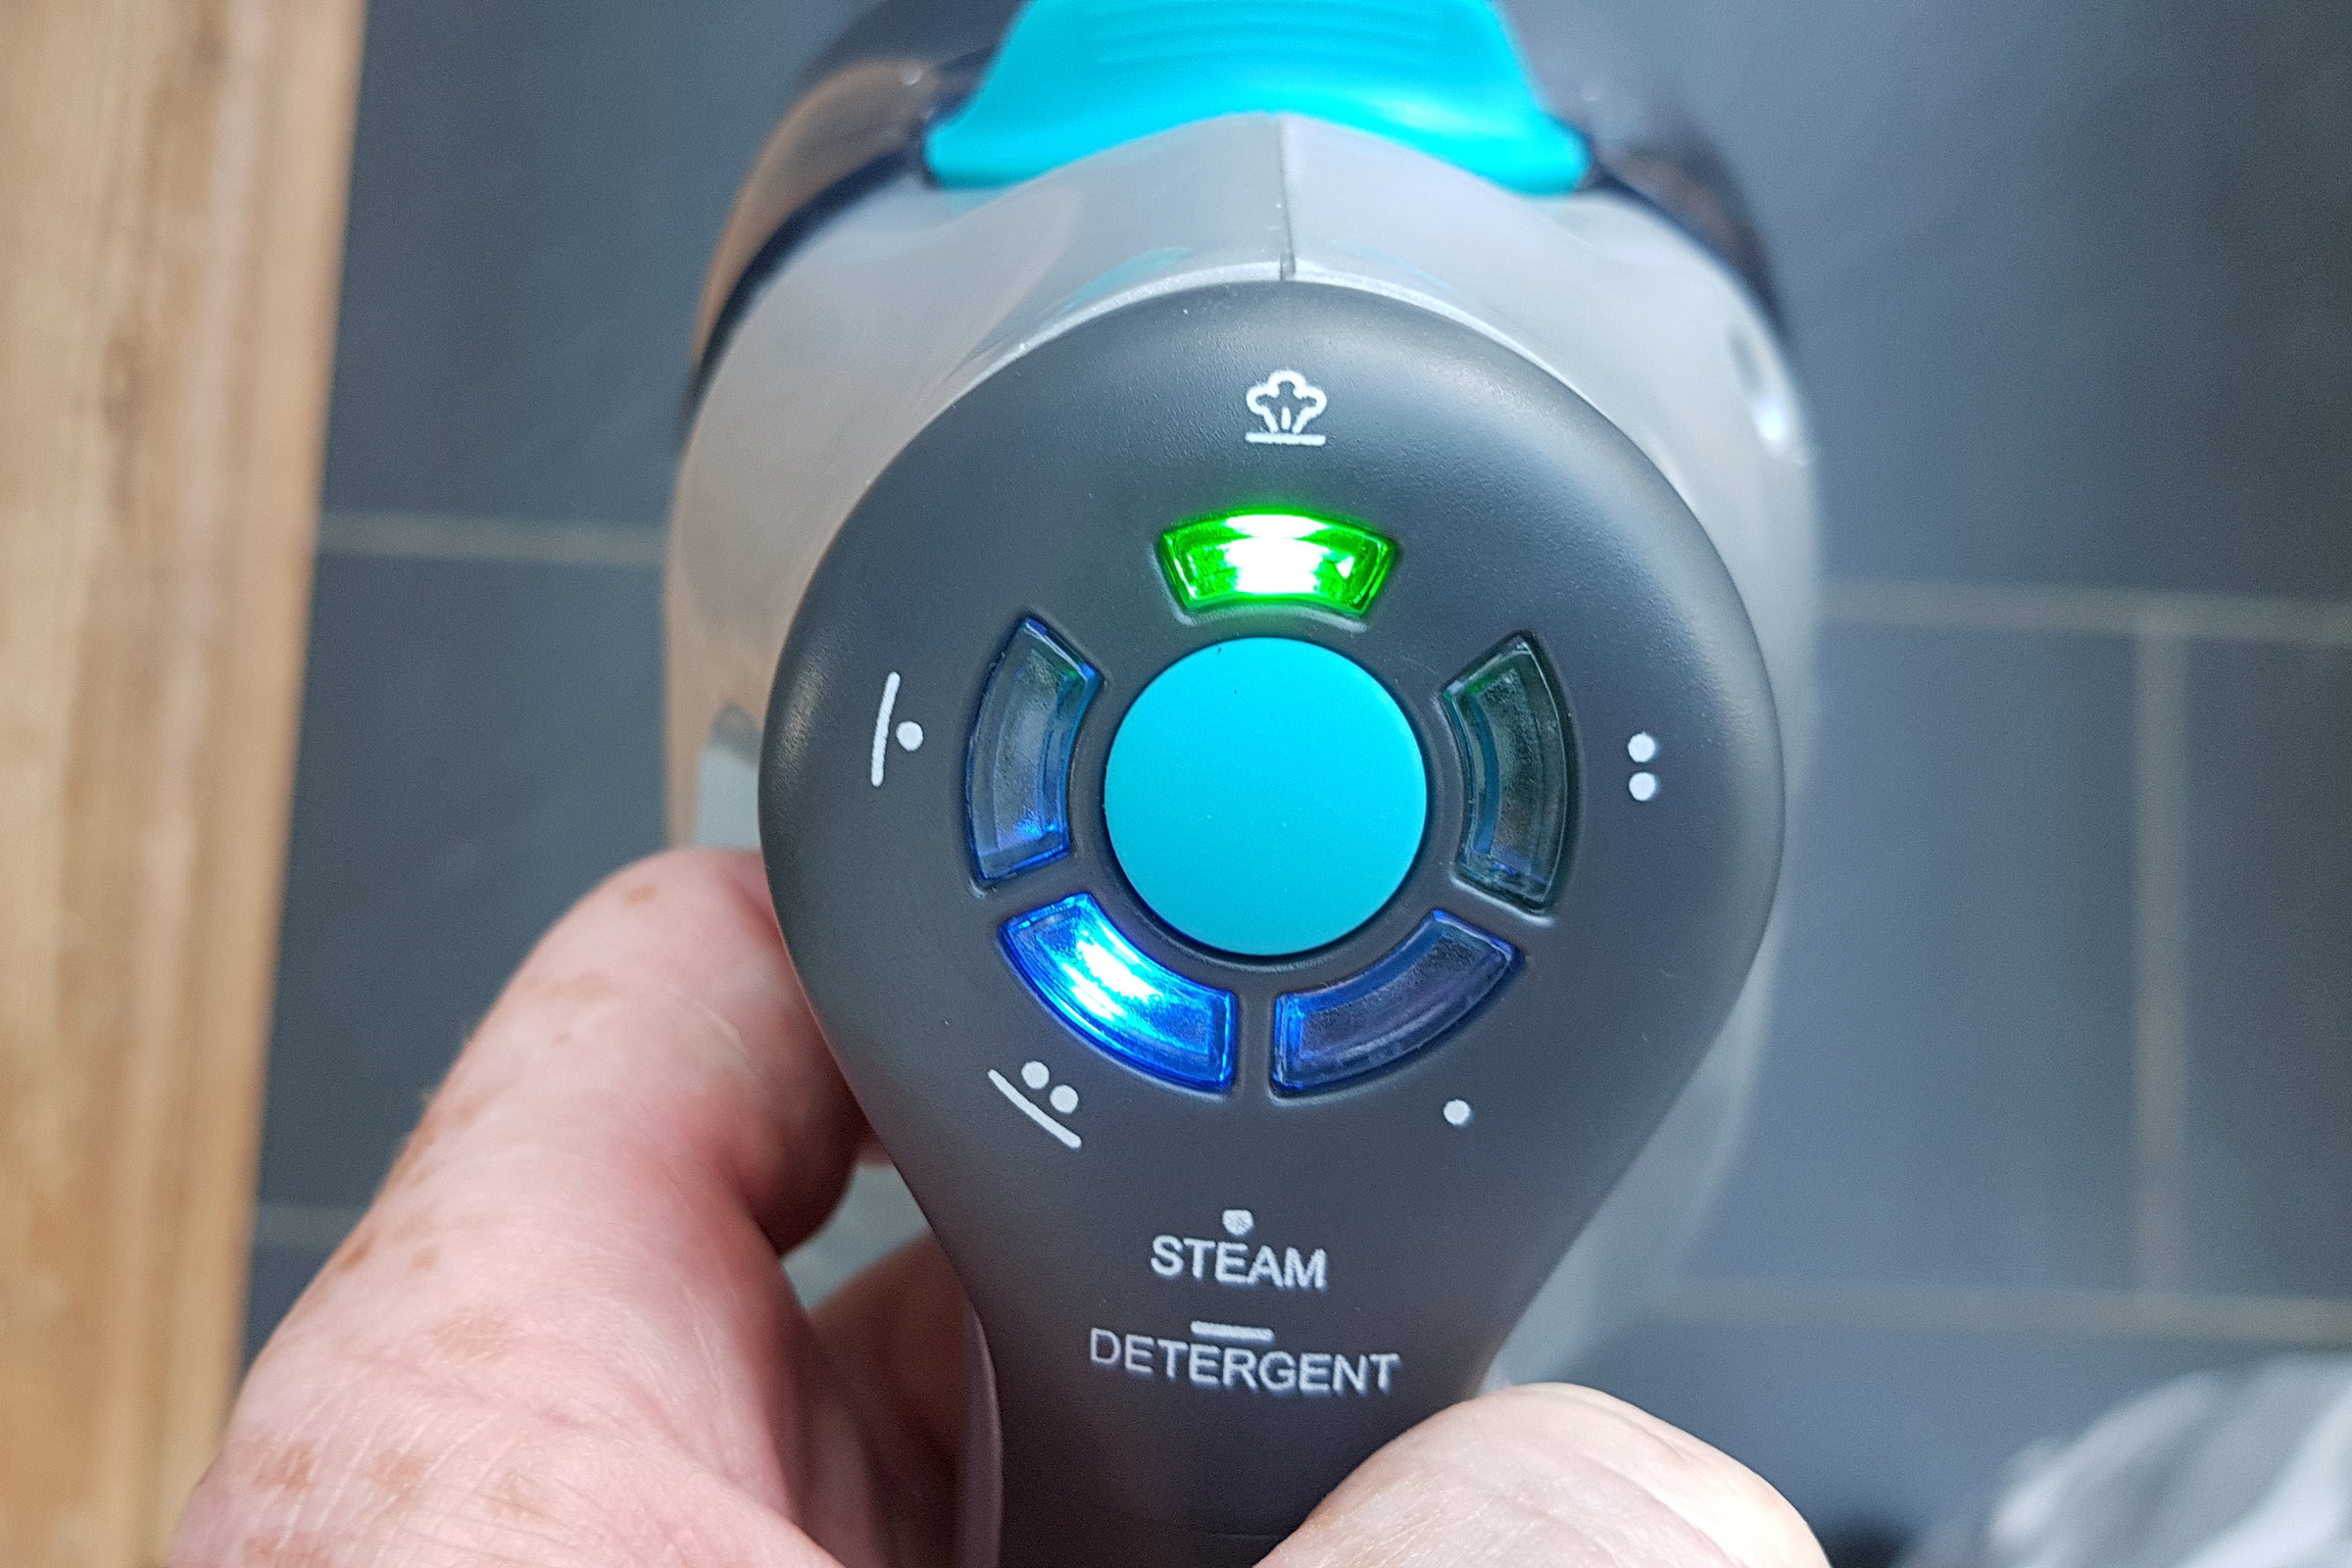 A Vax SteamFresh S82 vaccum cleaner's closing knob held in hand